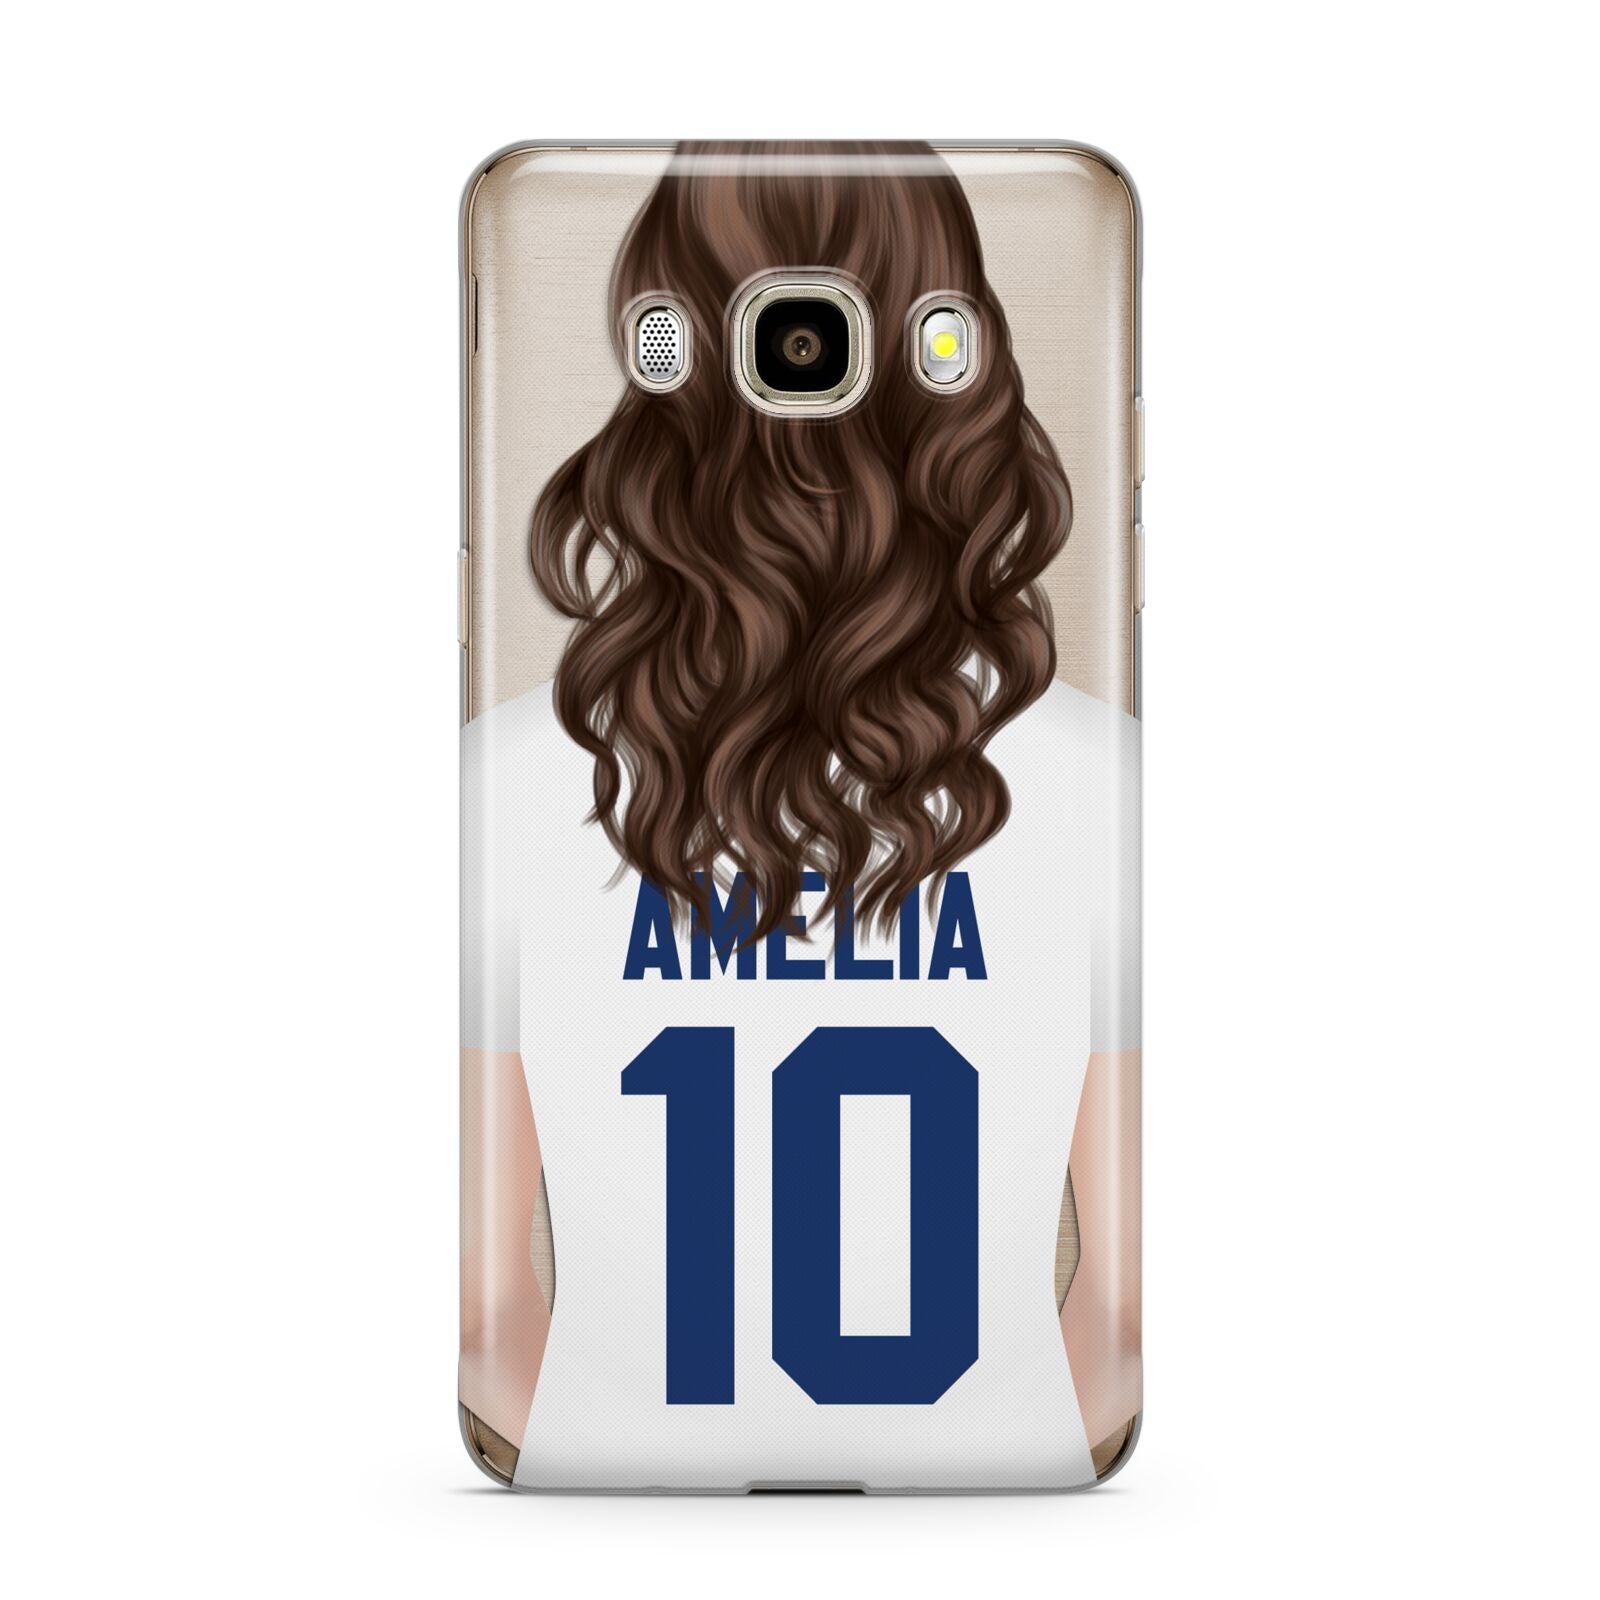 Womens Footballer Personalised Samsung Galaxy J7 2016 Case on gold phone